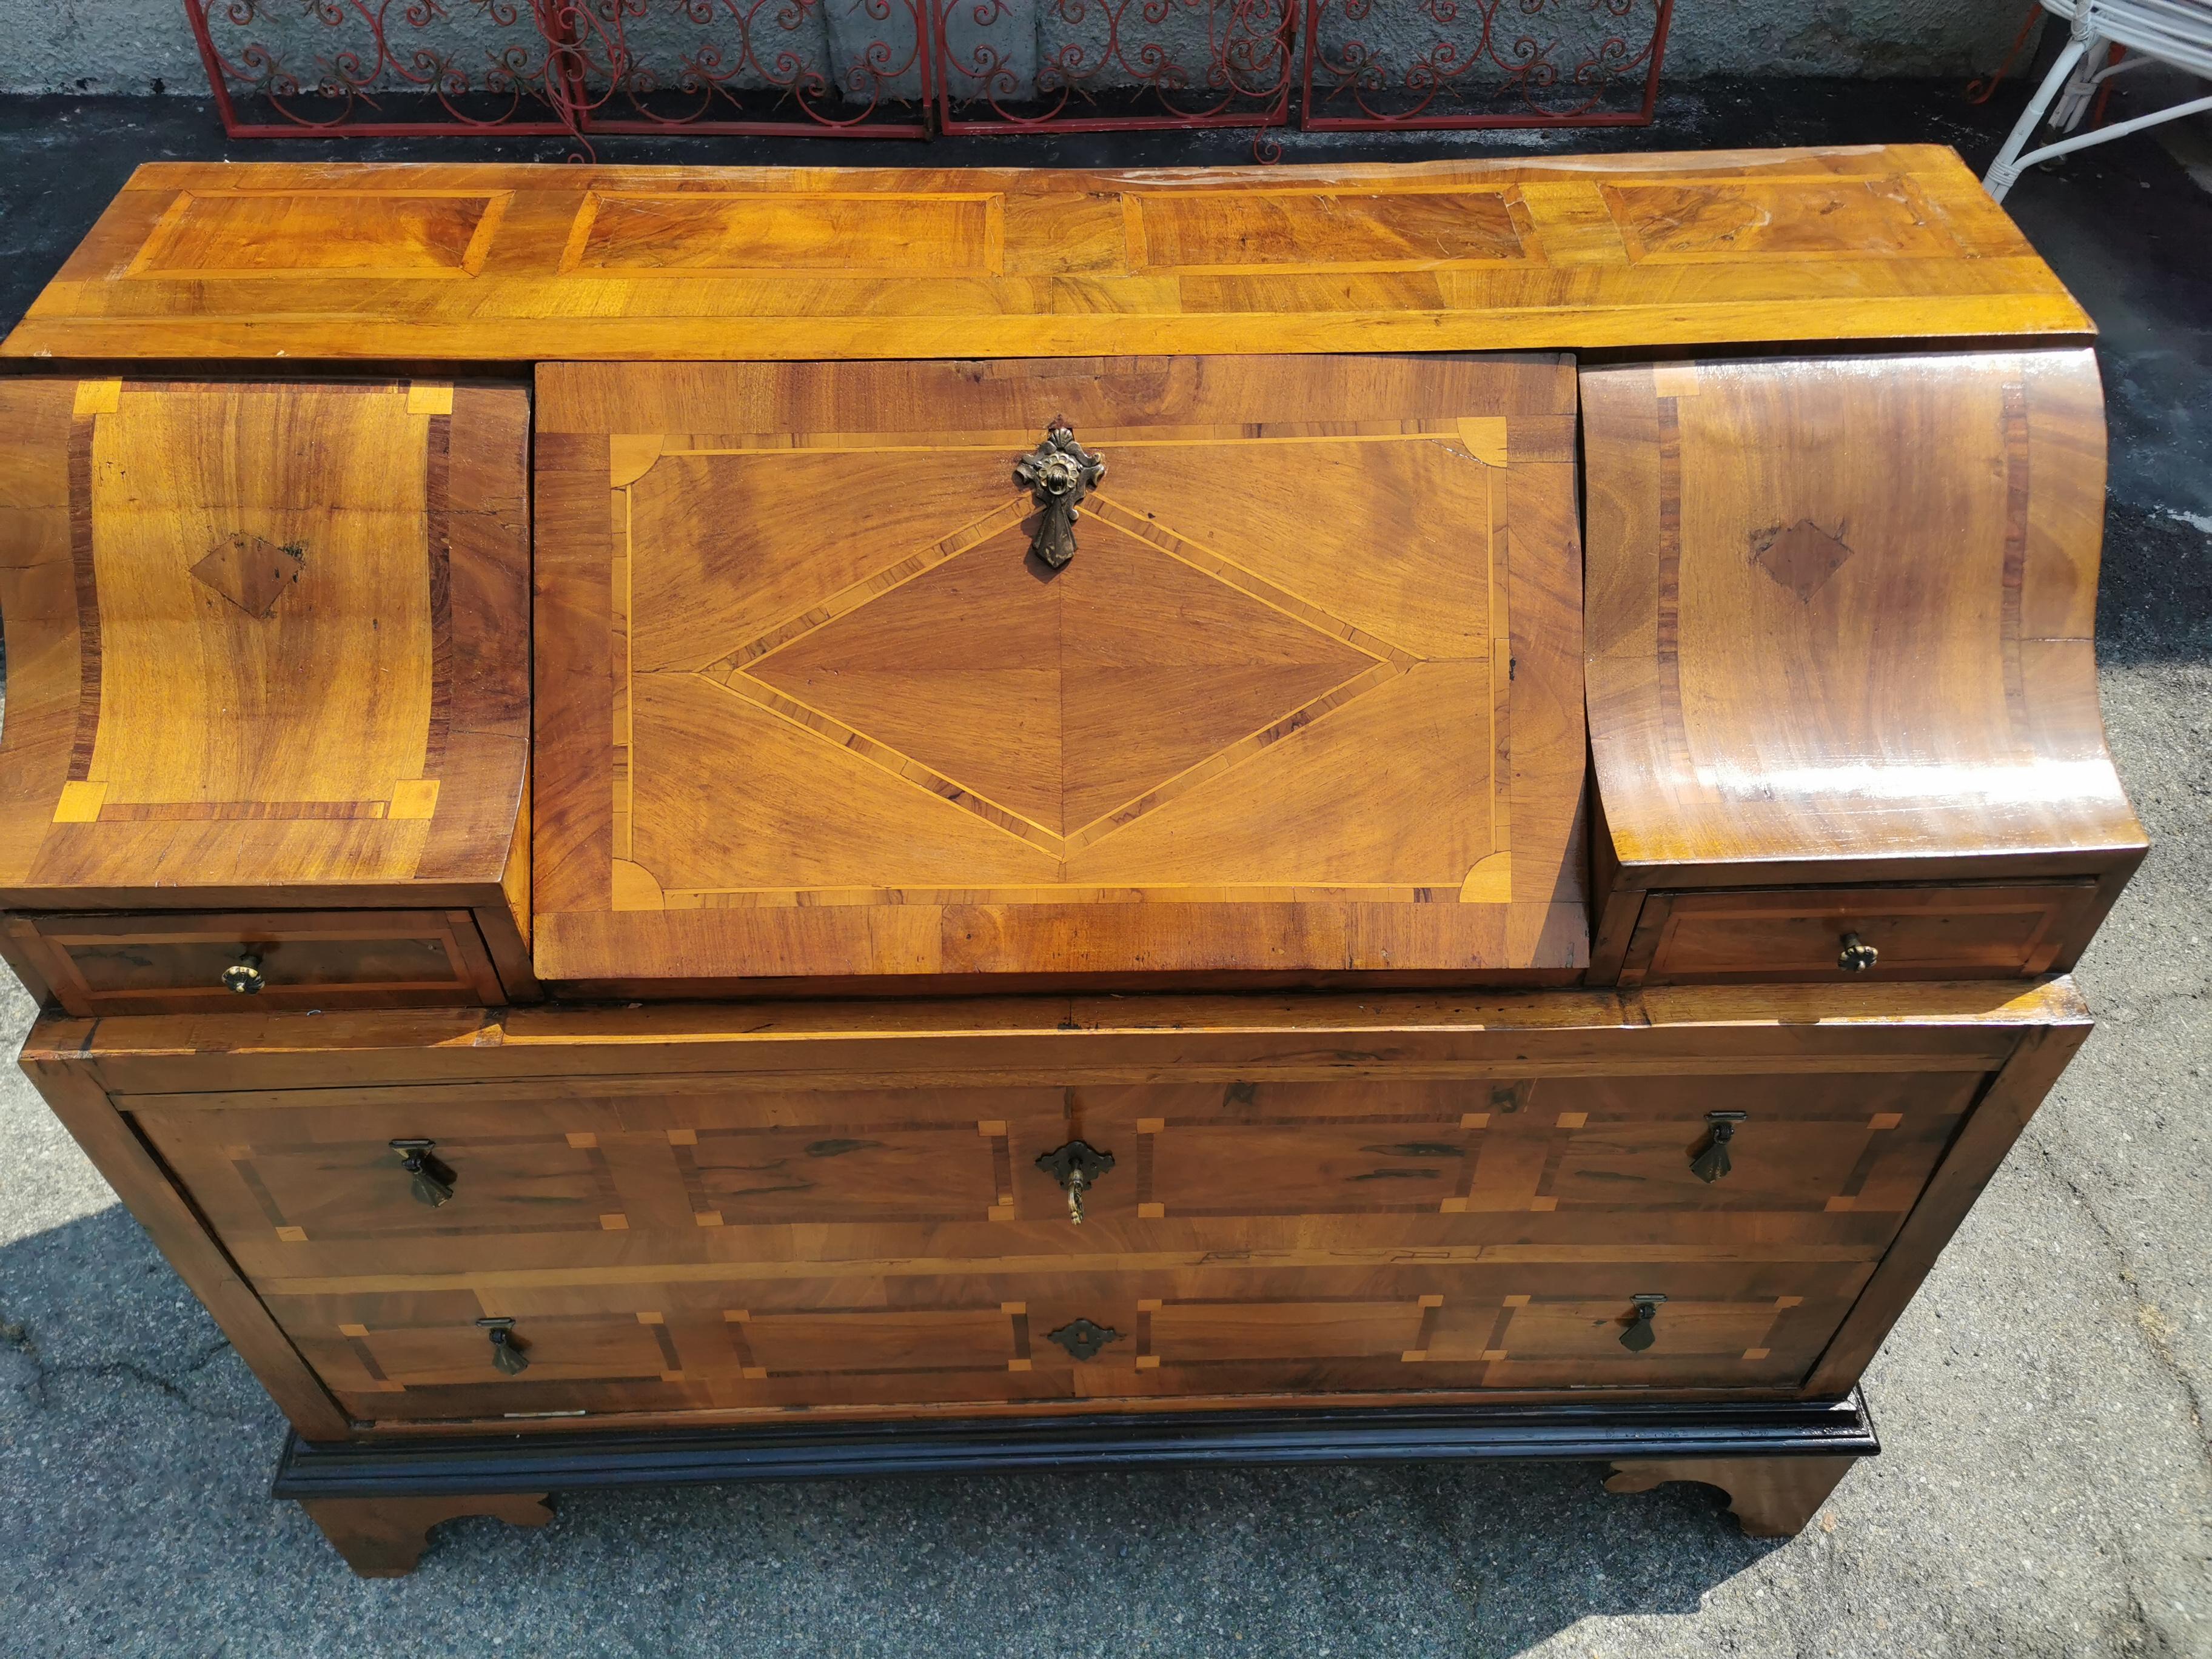 Very rare Italian Trumeau, coming from the city of Roma, Louis XVI era. The workmanship of the feet is also delightful. Rich marquetry work all around the item, quality solid walnut. it is a superb fine antique will definetly change the atmosphere